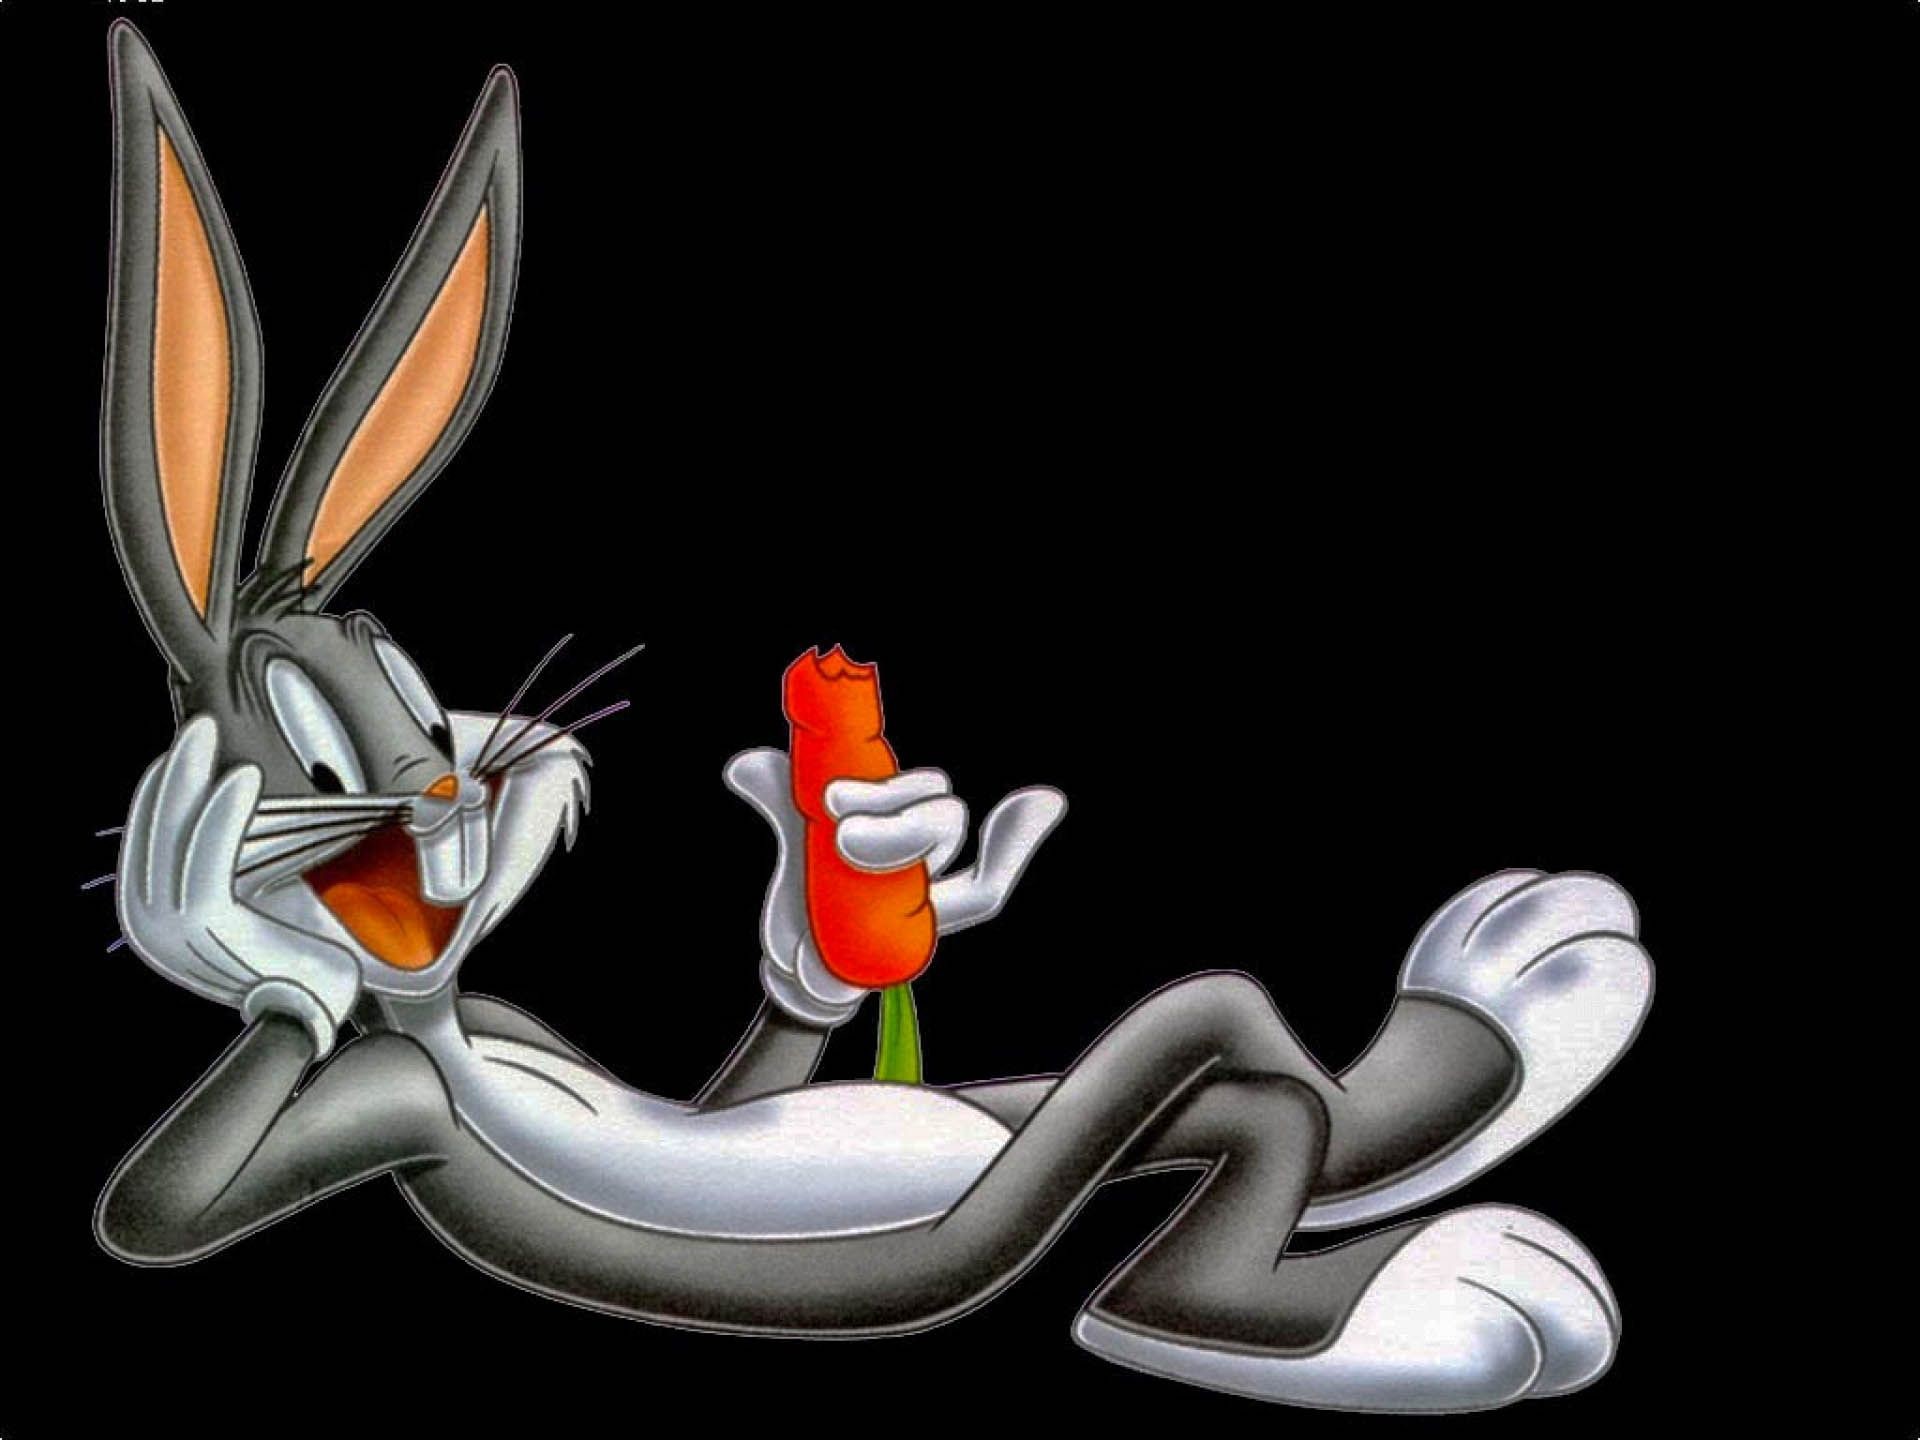 1920x1440 Bugs Bunny Awesome HD Wallpapers .. Bugs Bunny Wallpapers and Backgrounds  and download them on all your devices, Computer, Smartphone, Tablet.